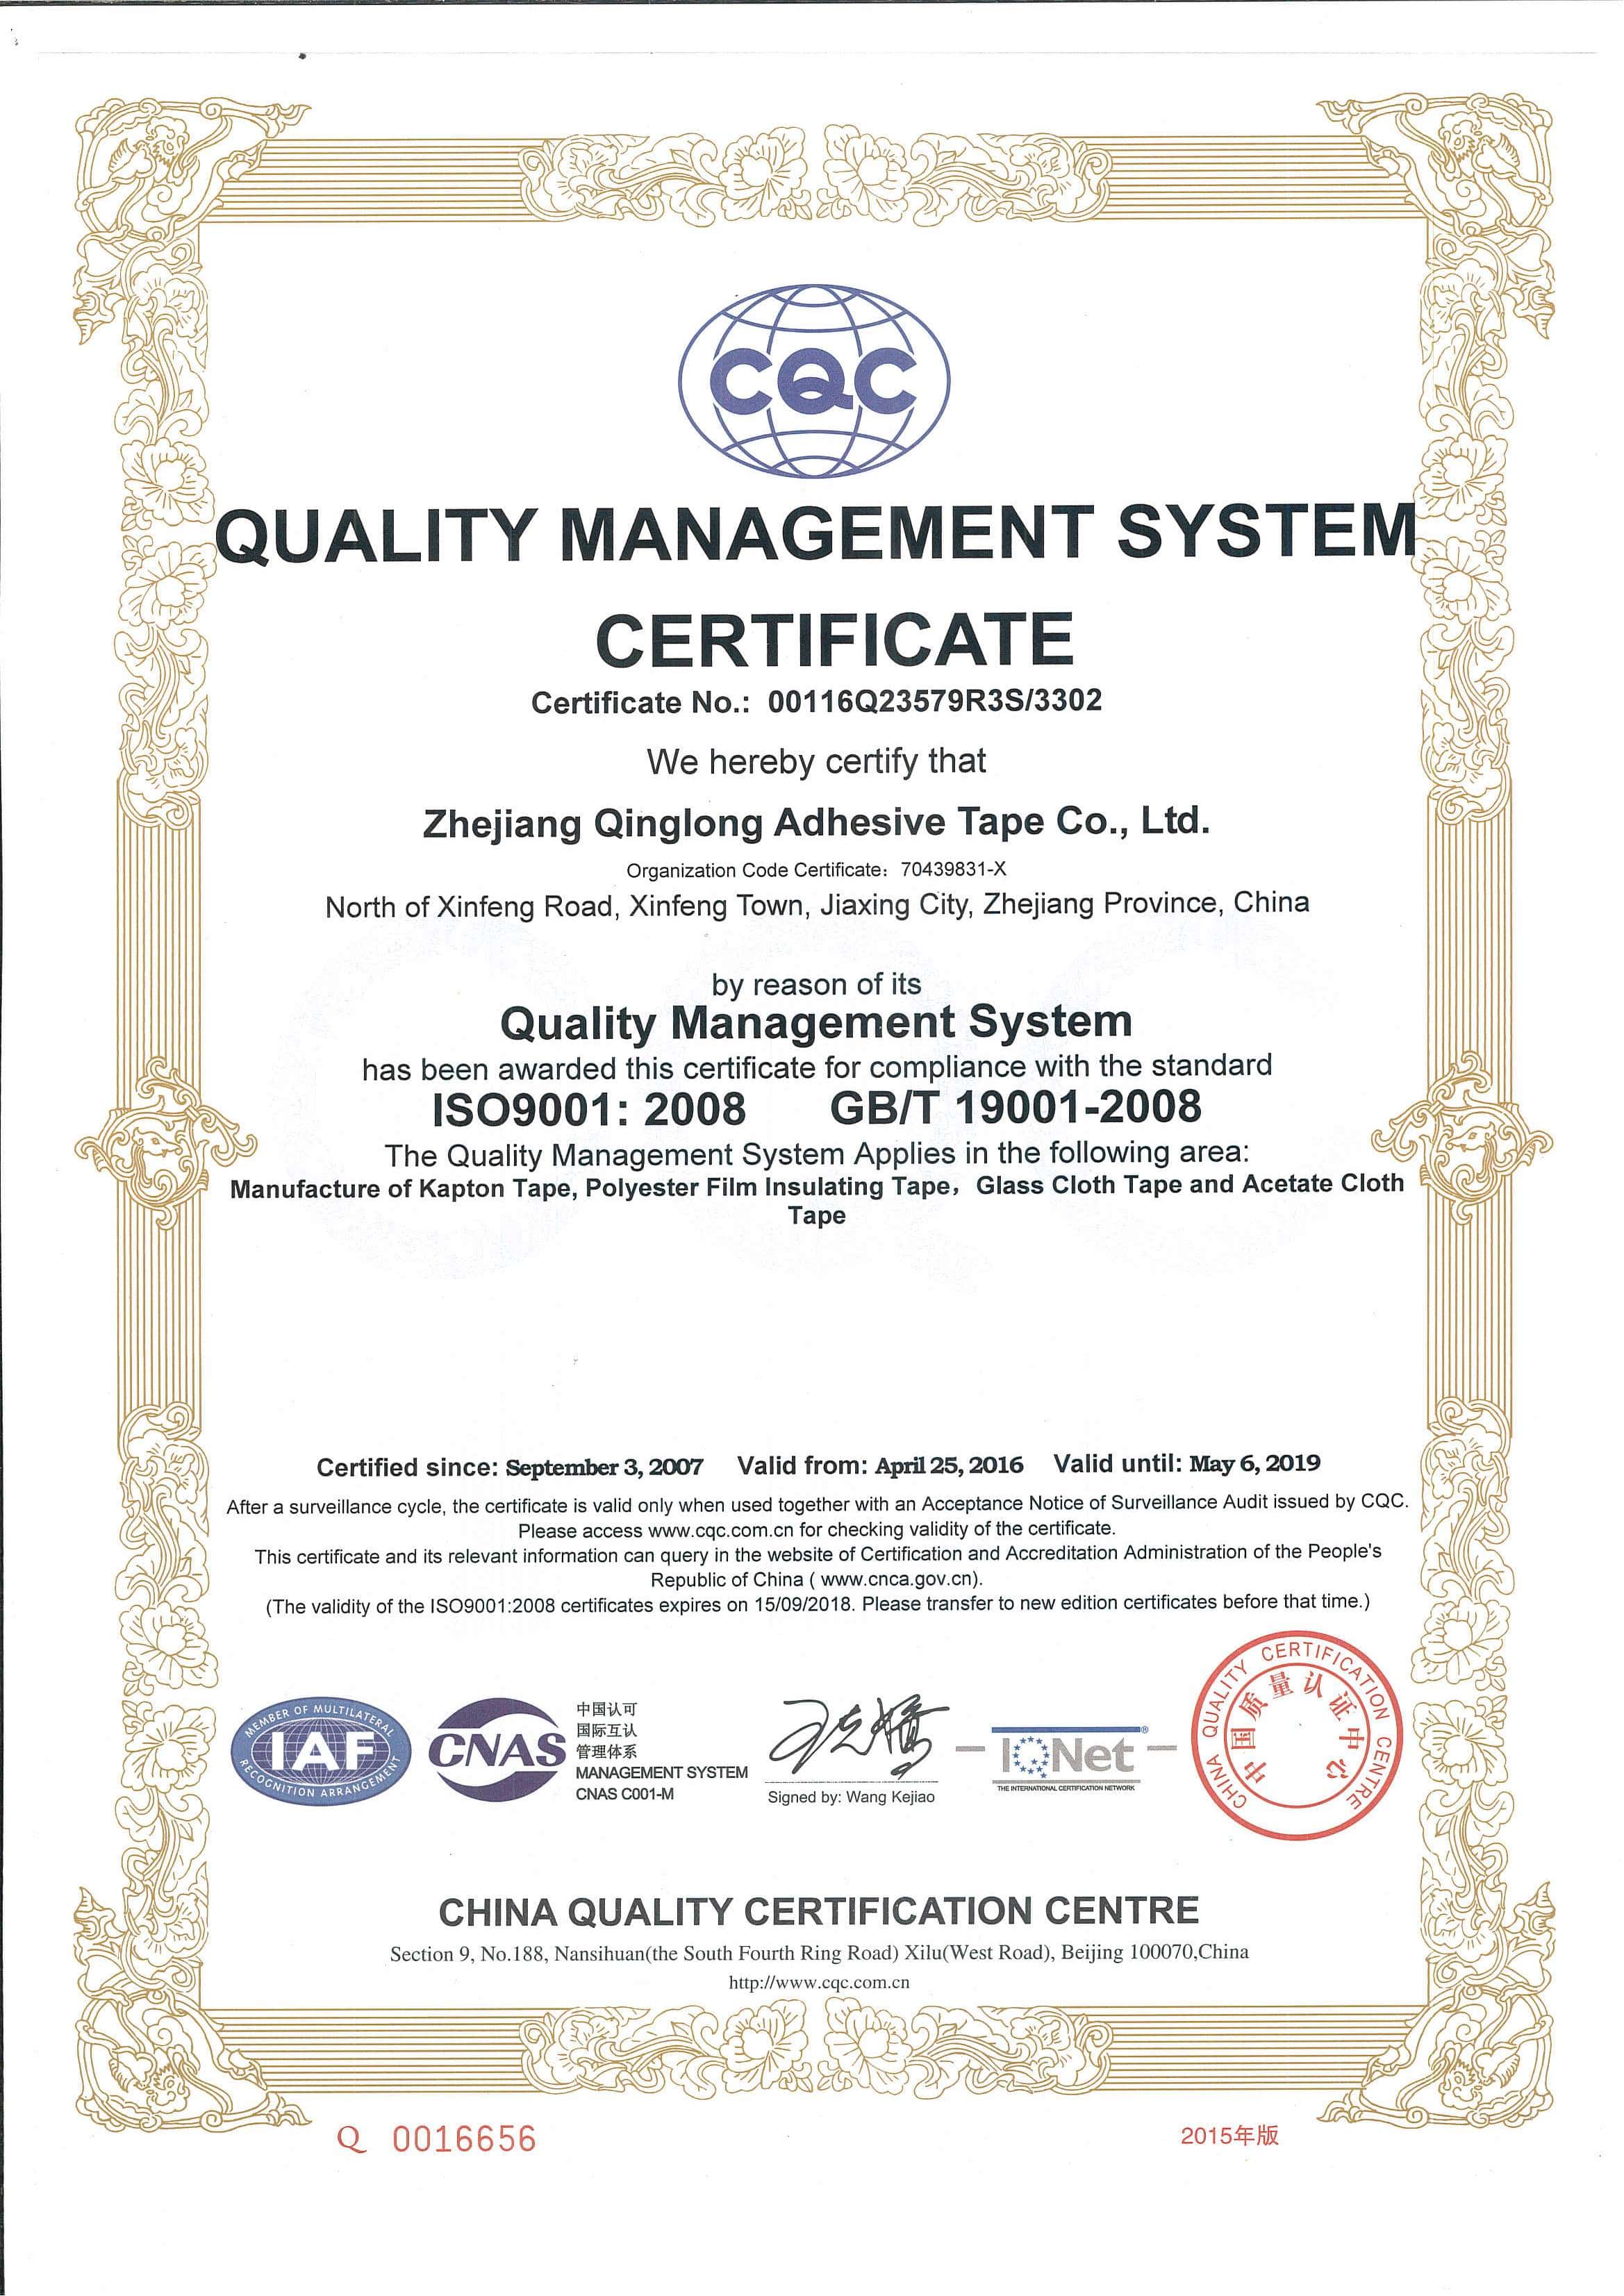 The company passed ISO9001 and ISO14001 certifications